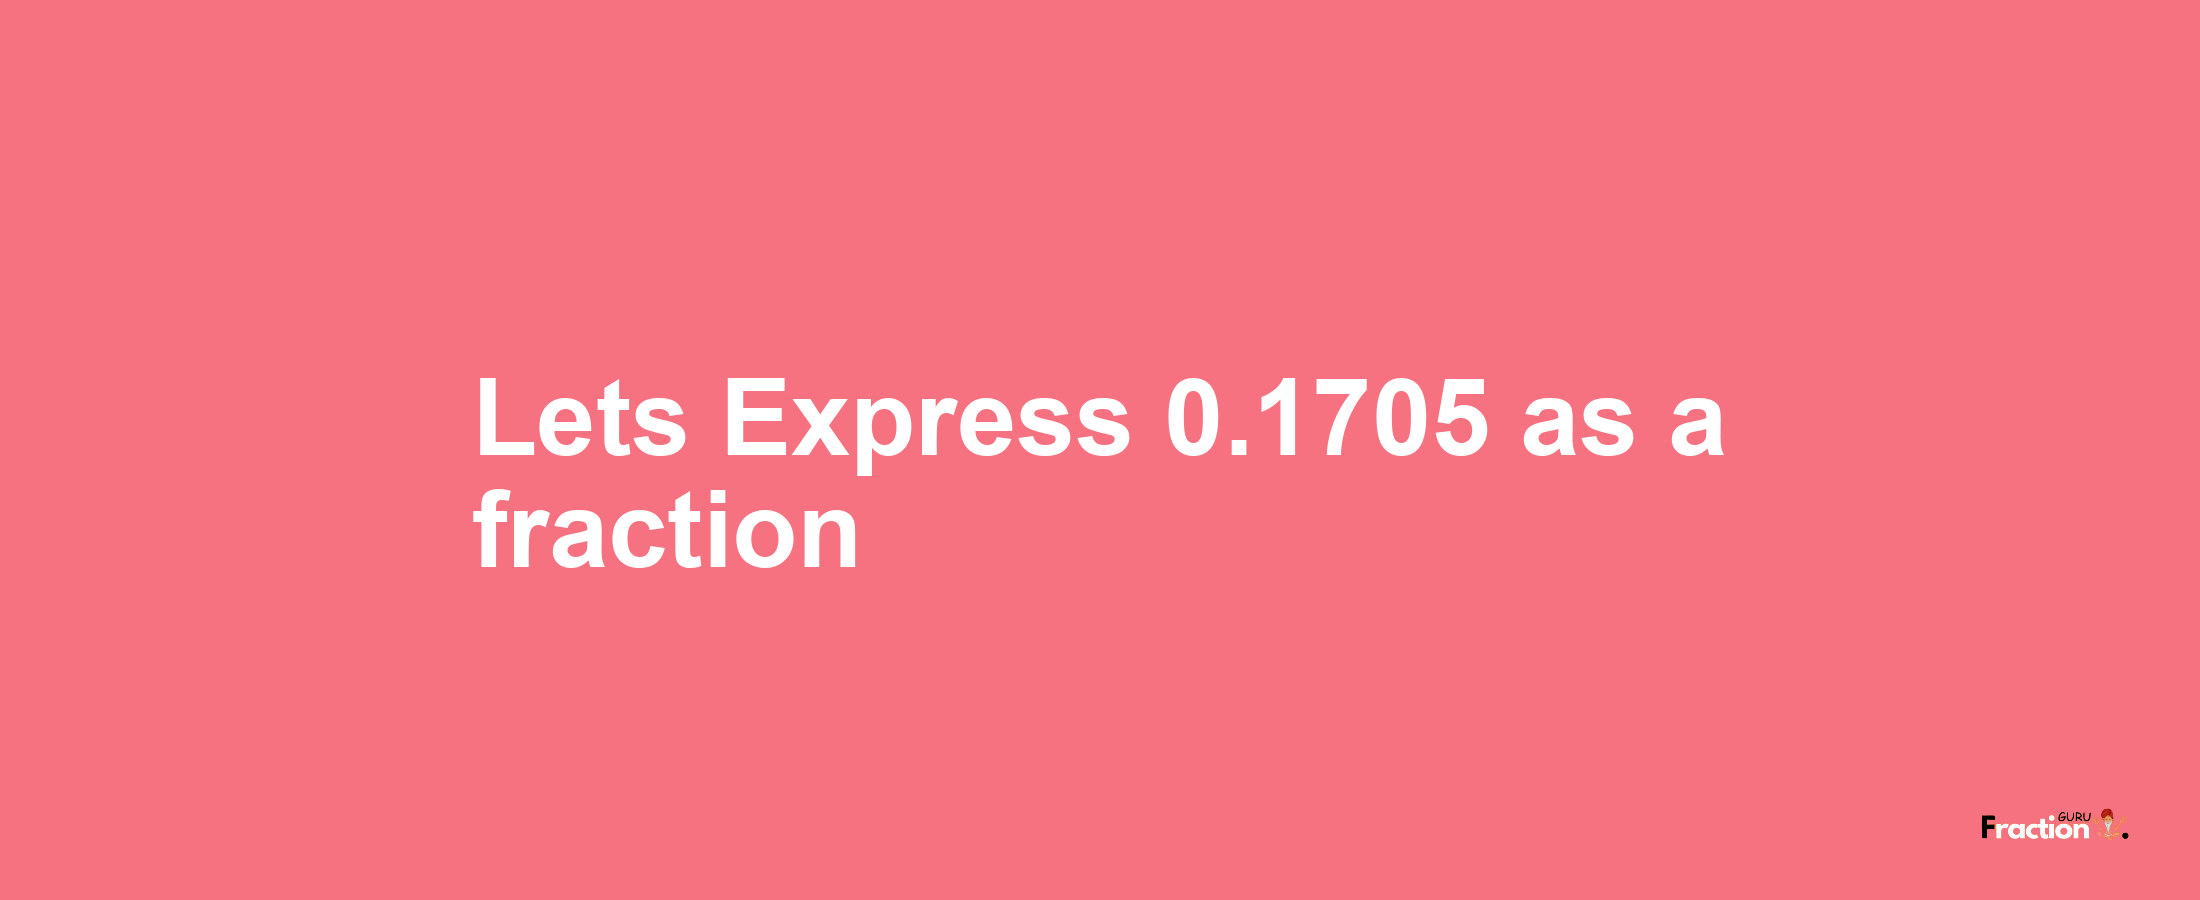 Lets Express 0.1705 as afraction